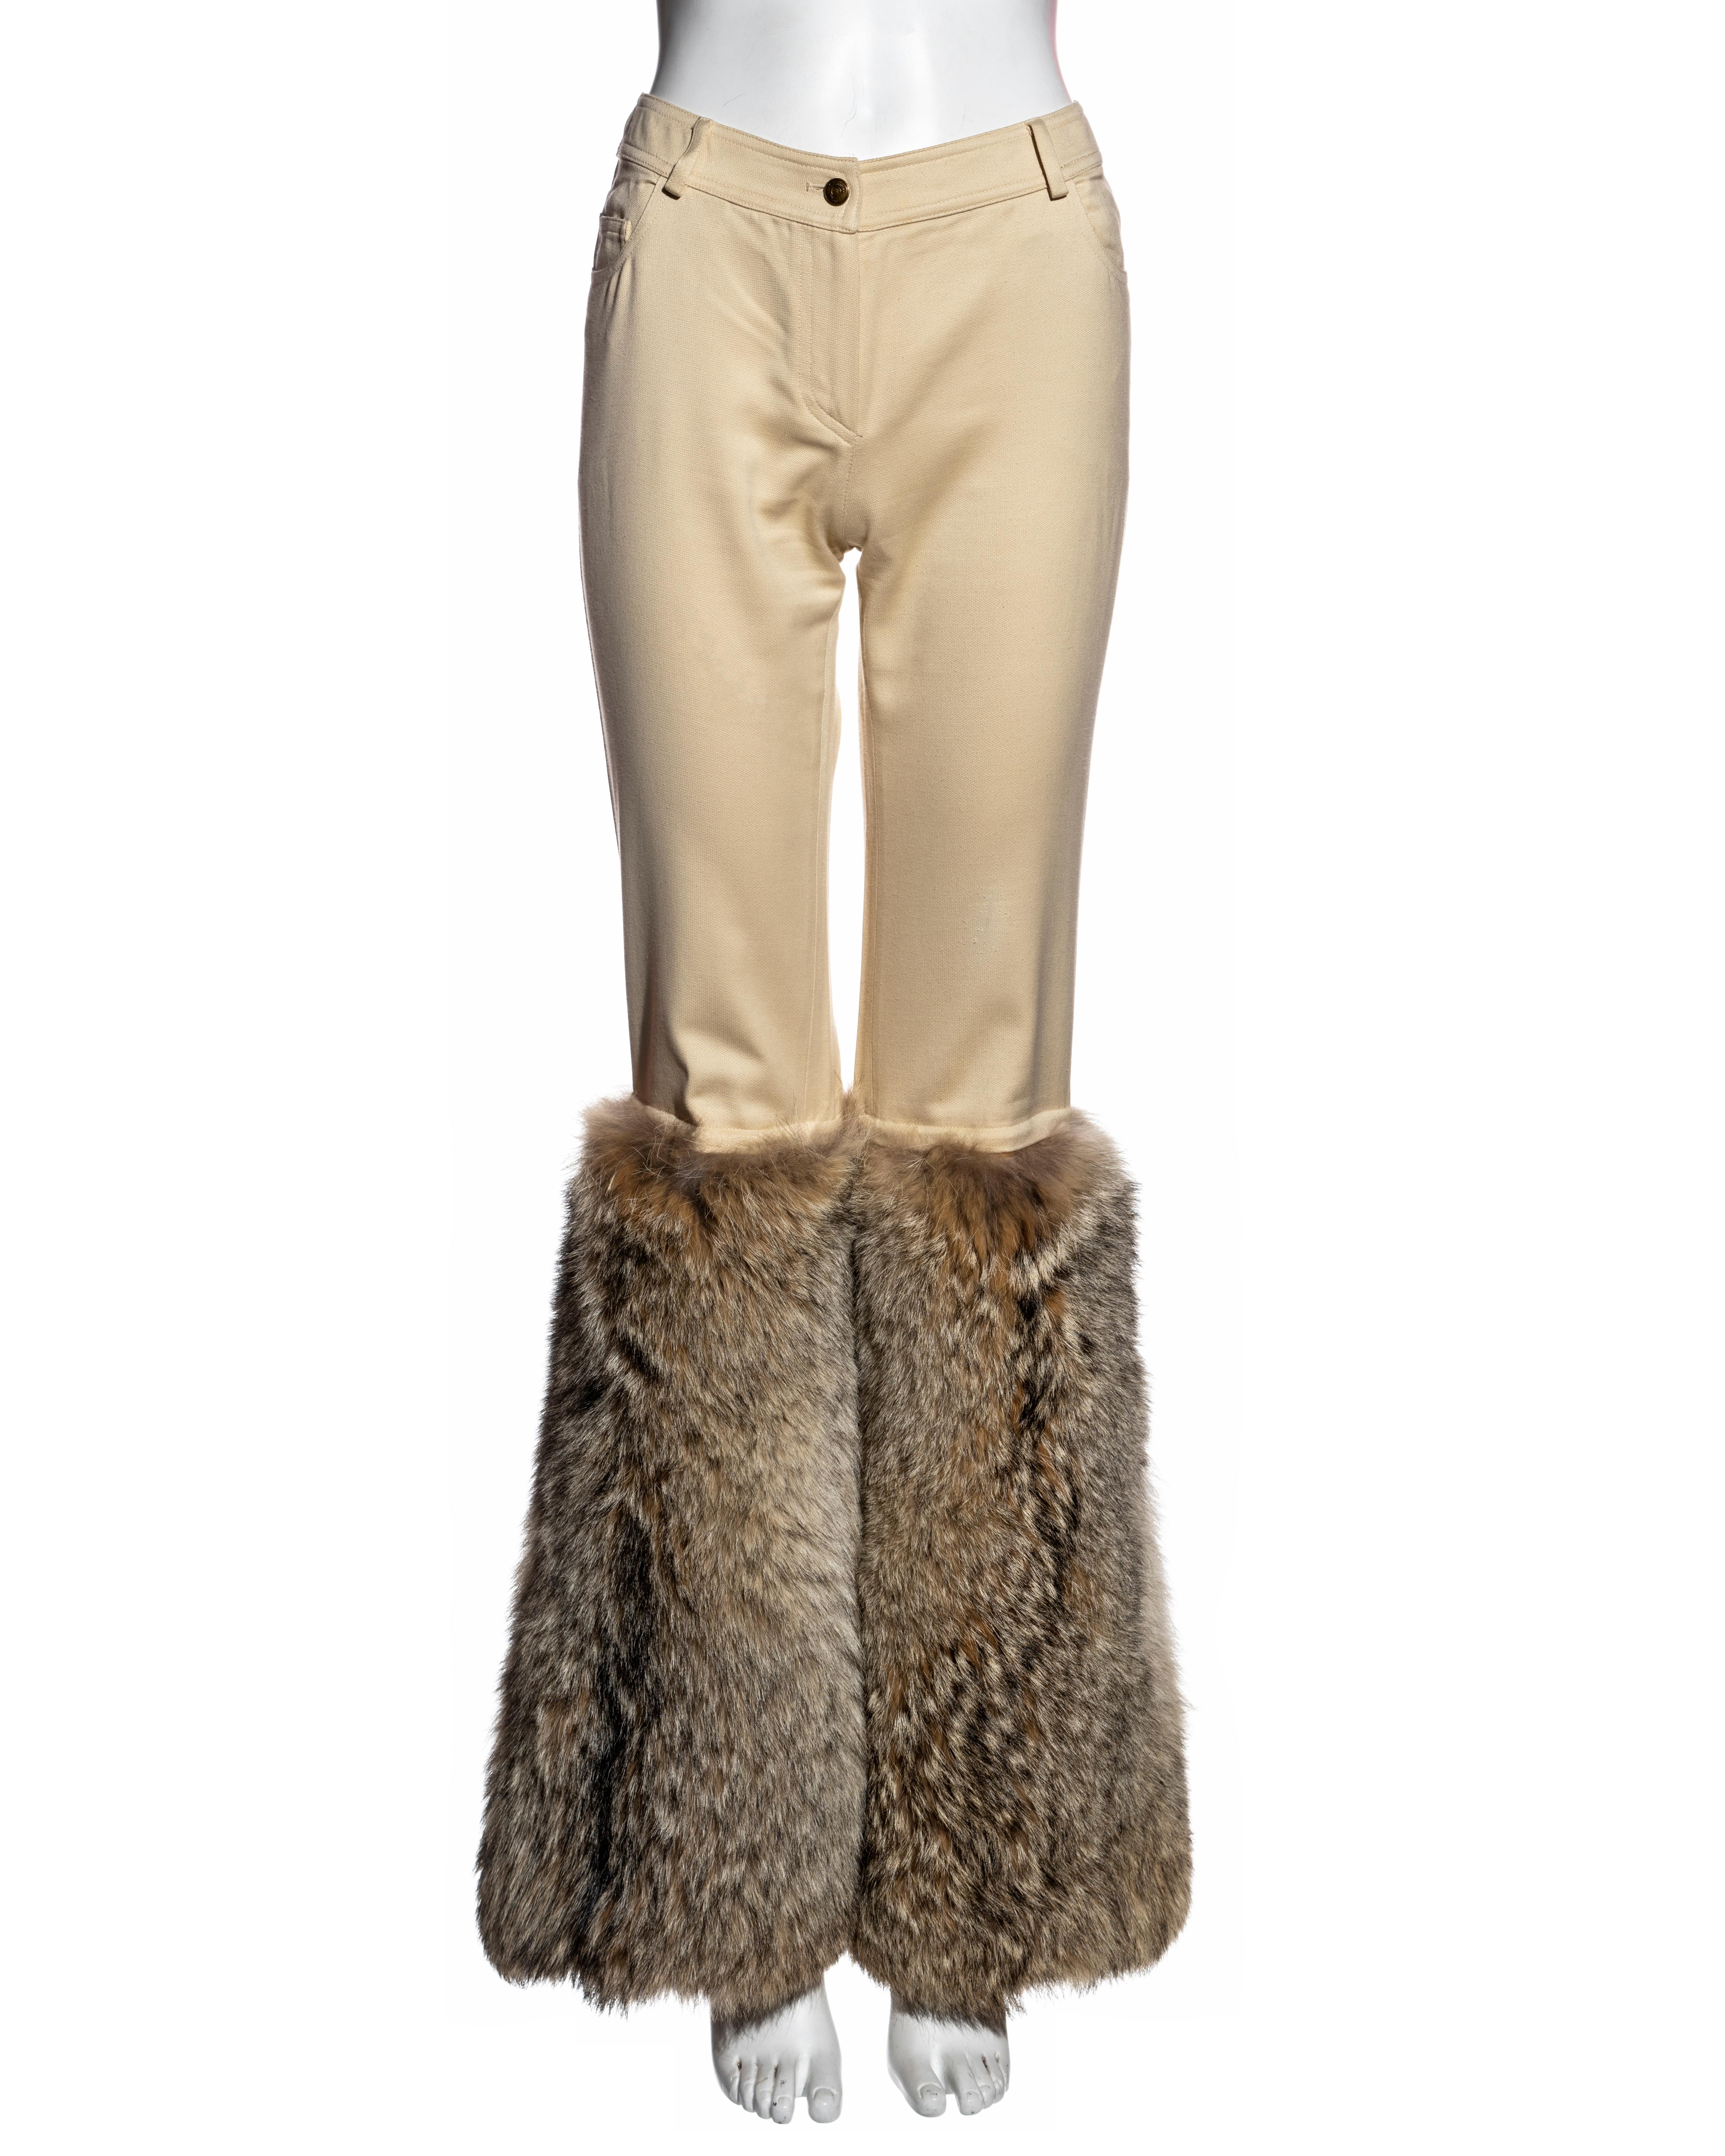 ▪ Christian Dior cream cotton and fur pants 
▪ Designed by John Galliano 
▪ Cream cotton canvas 
▪ Slim-fit 
▪ Oversized Coyote fur panels 
▪ FR 38 - UK 10 - US 6 (runs small)
▪ Fall-Winter 2002
▪ 100% Cotton, 100% Coyote 
▪ Matching Coyote fur